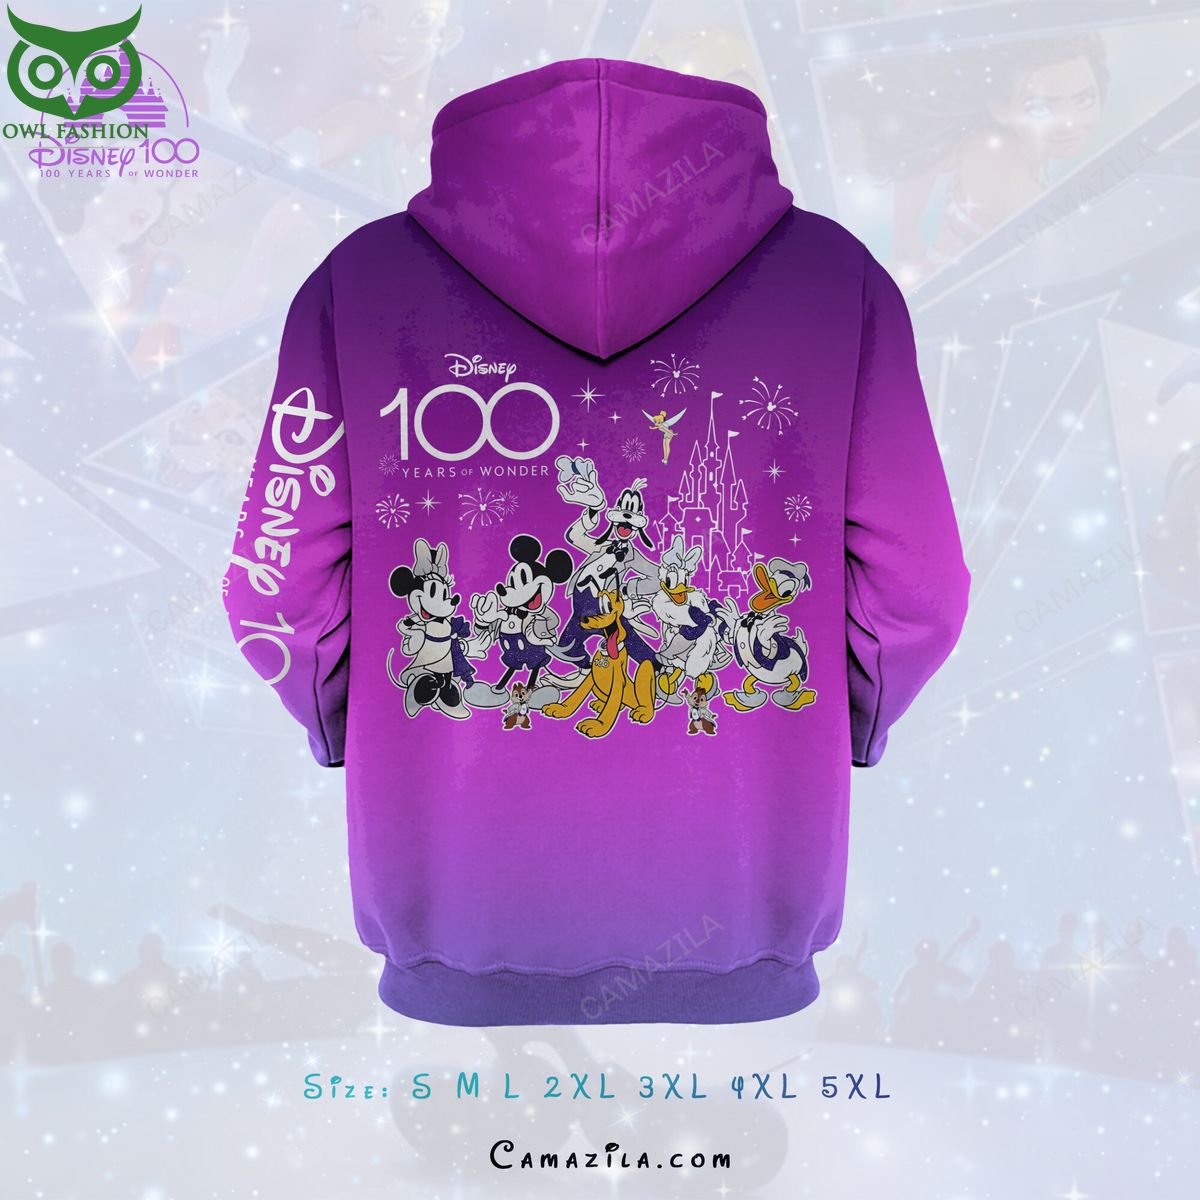 Disney 100 Years of Wonder Anniversary 3D Hoodie Zip Such a charming picture.